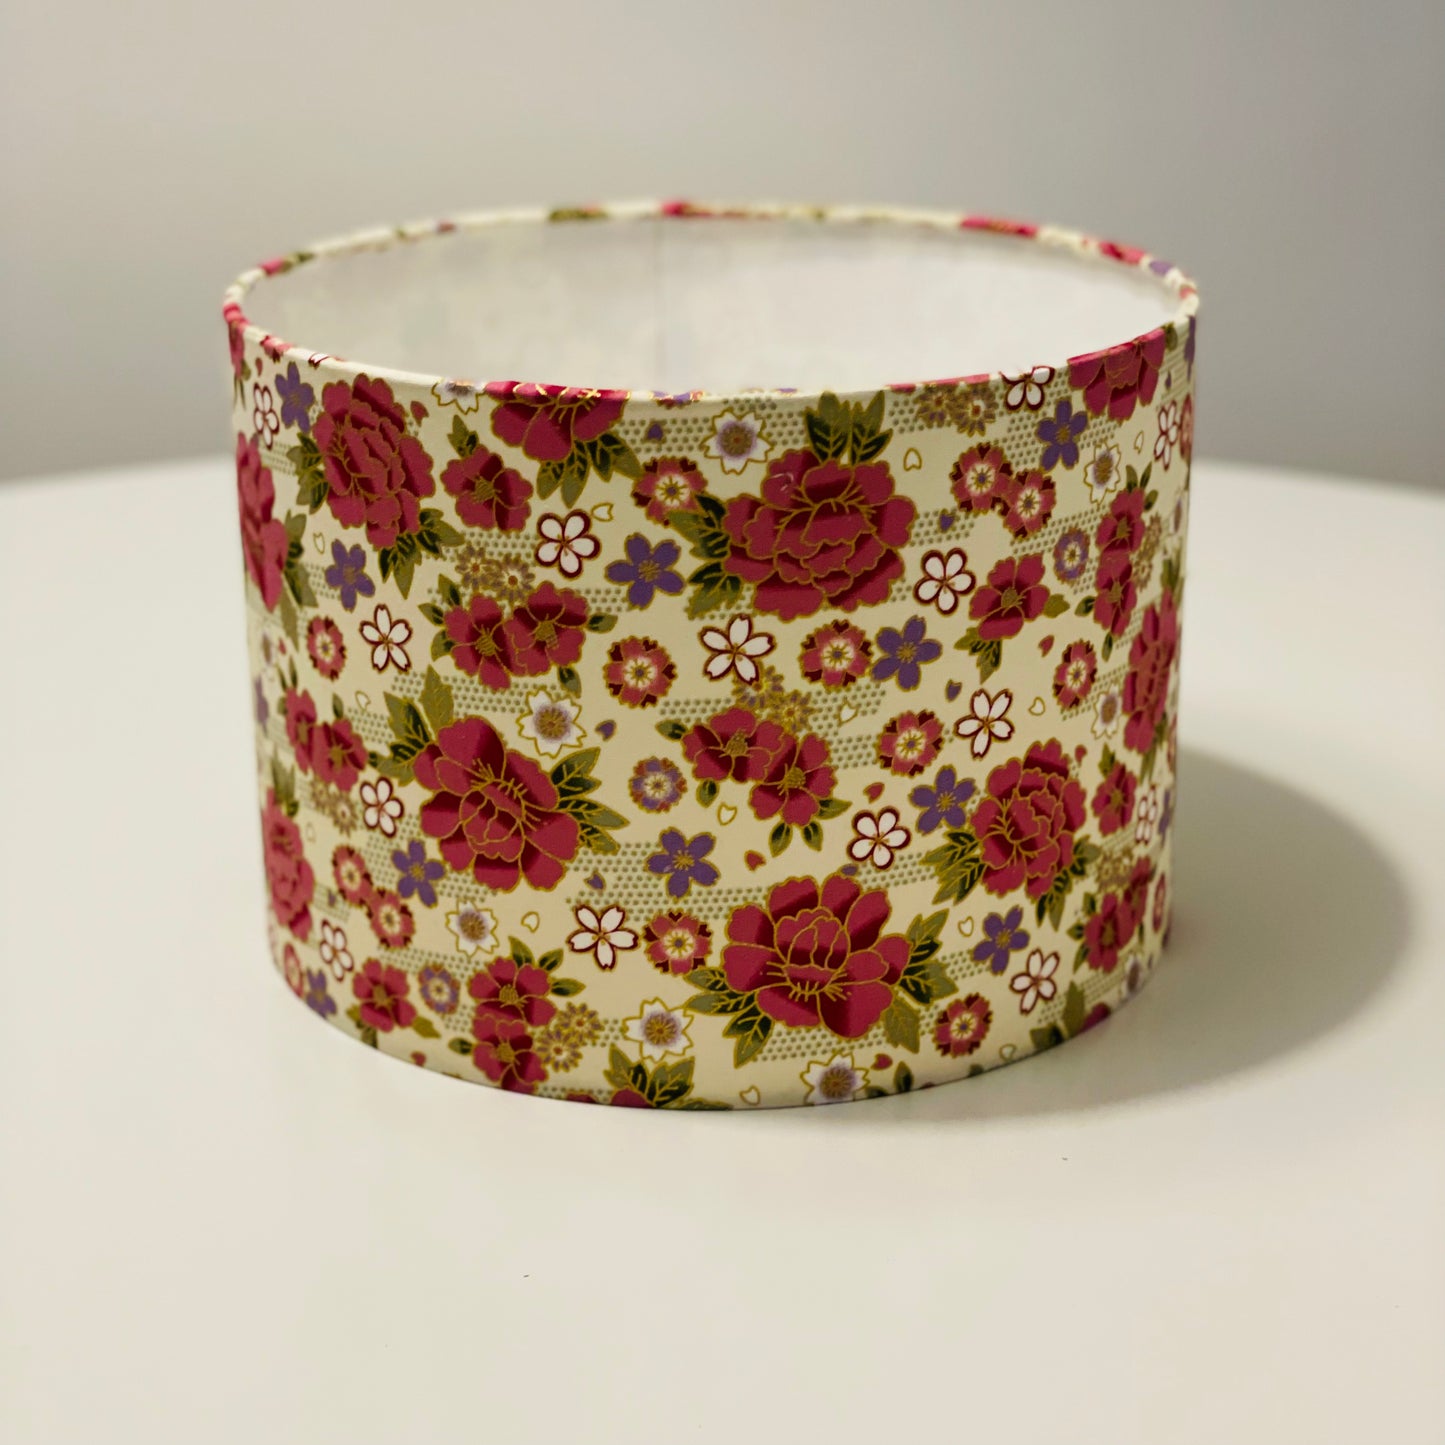 10 inch Drum Lampshade. Traditional Japanese Fabric. Mulberry and Lilac Peony Motif on Cream with Gold Accents.